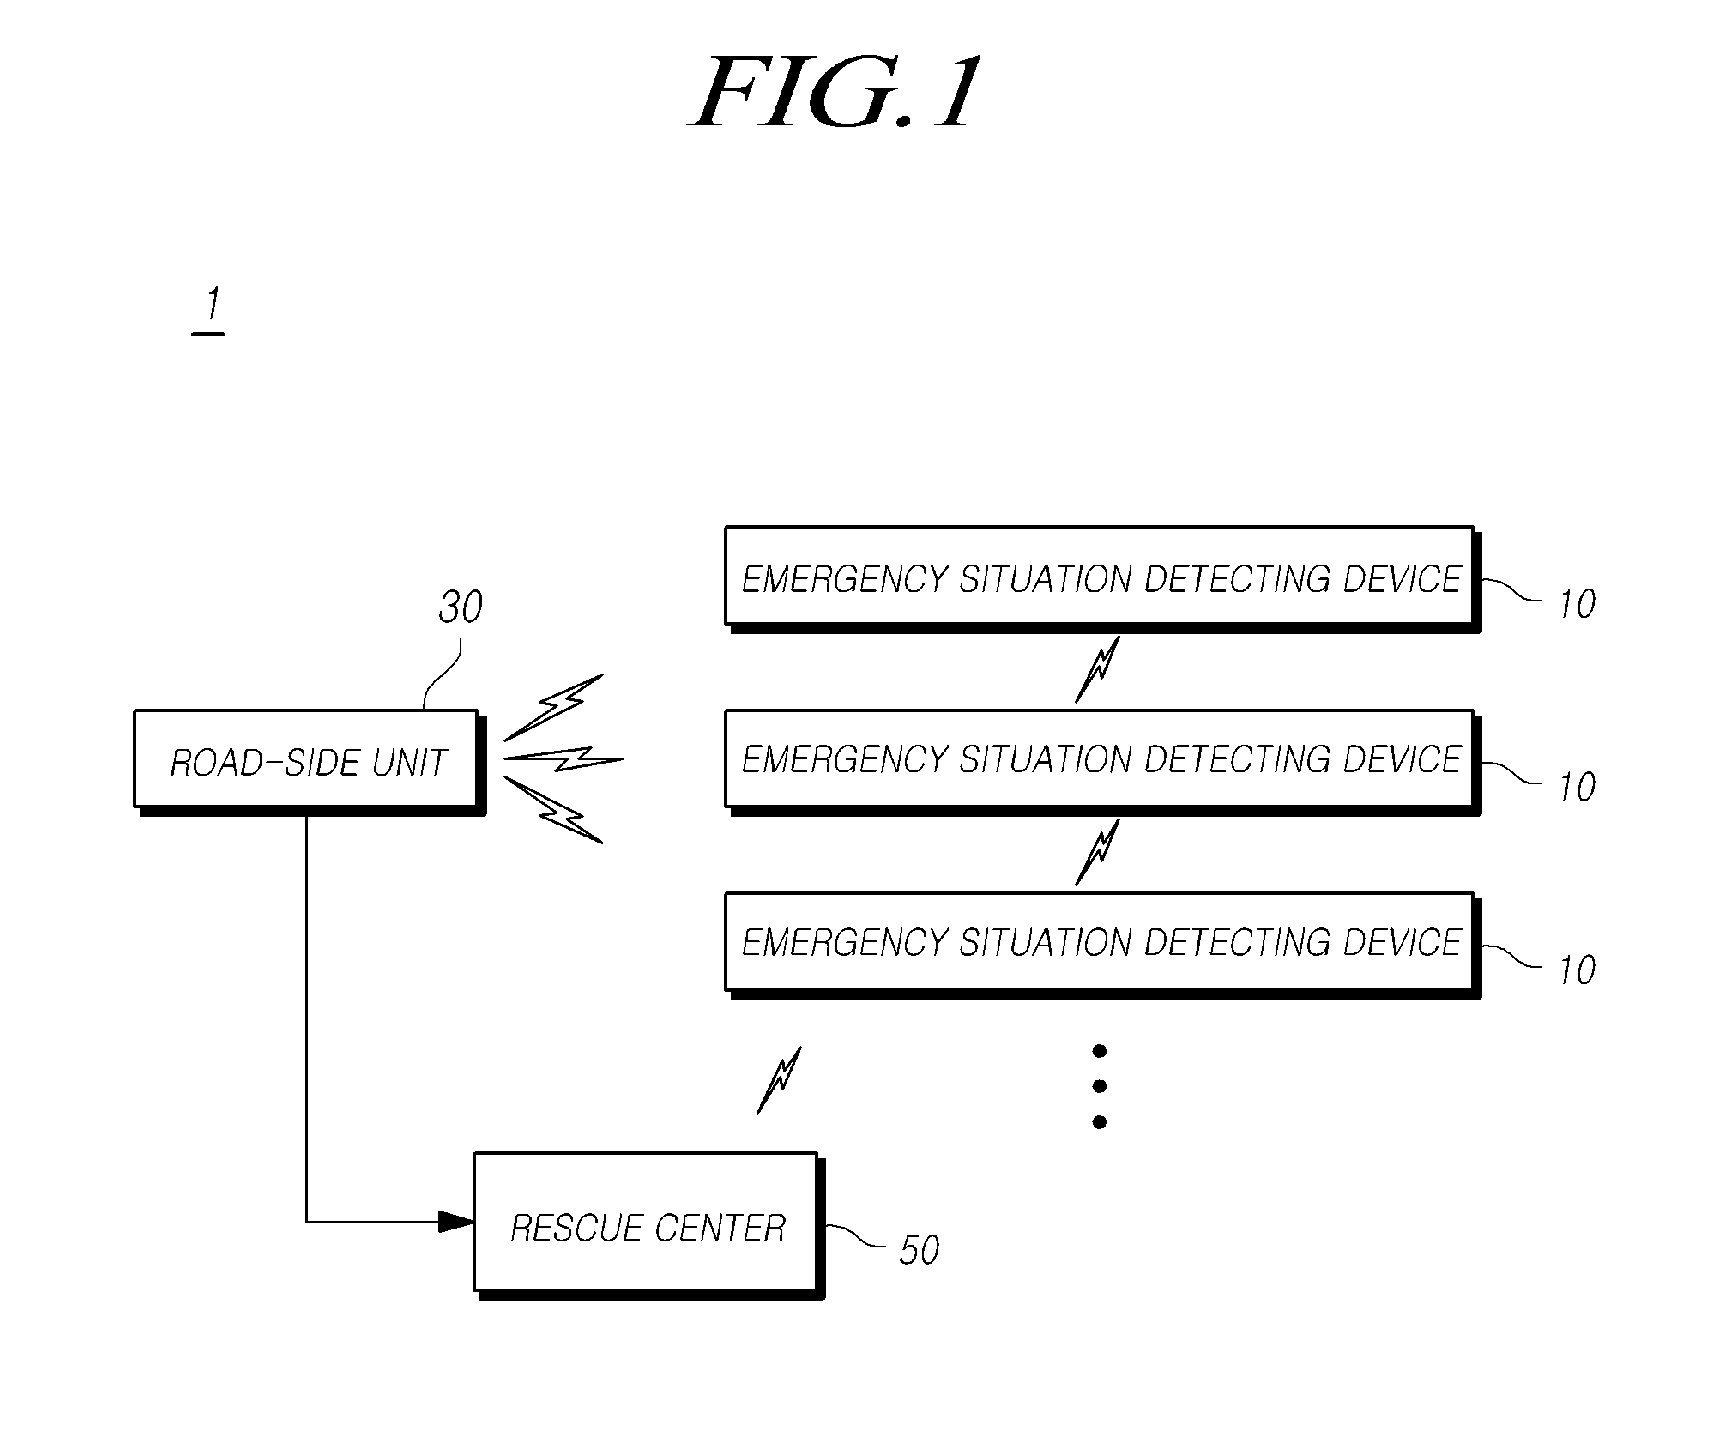 Apparatus and method for detecting emergency situation of vehicle